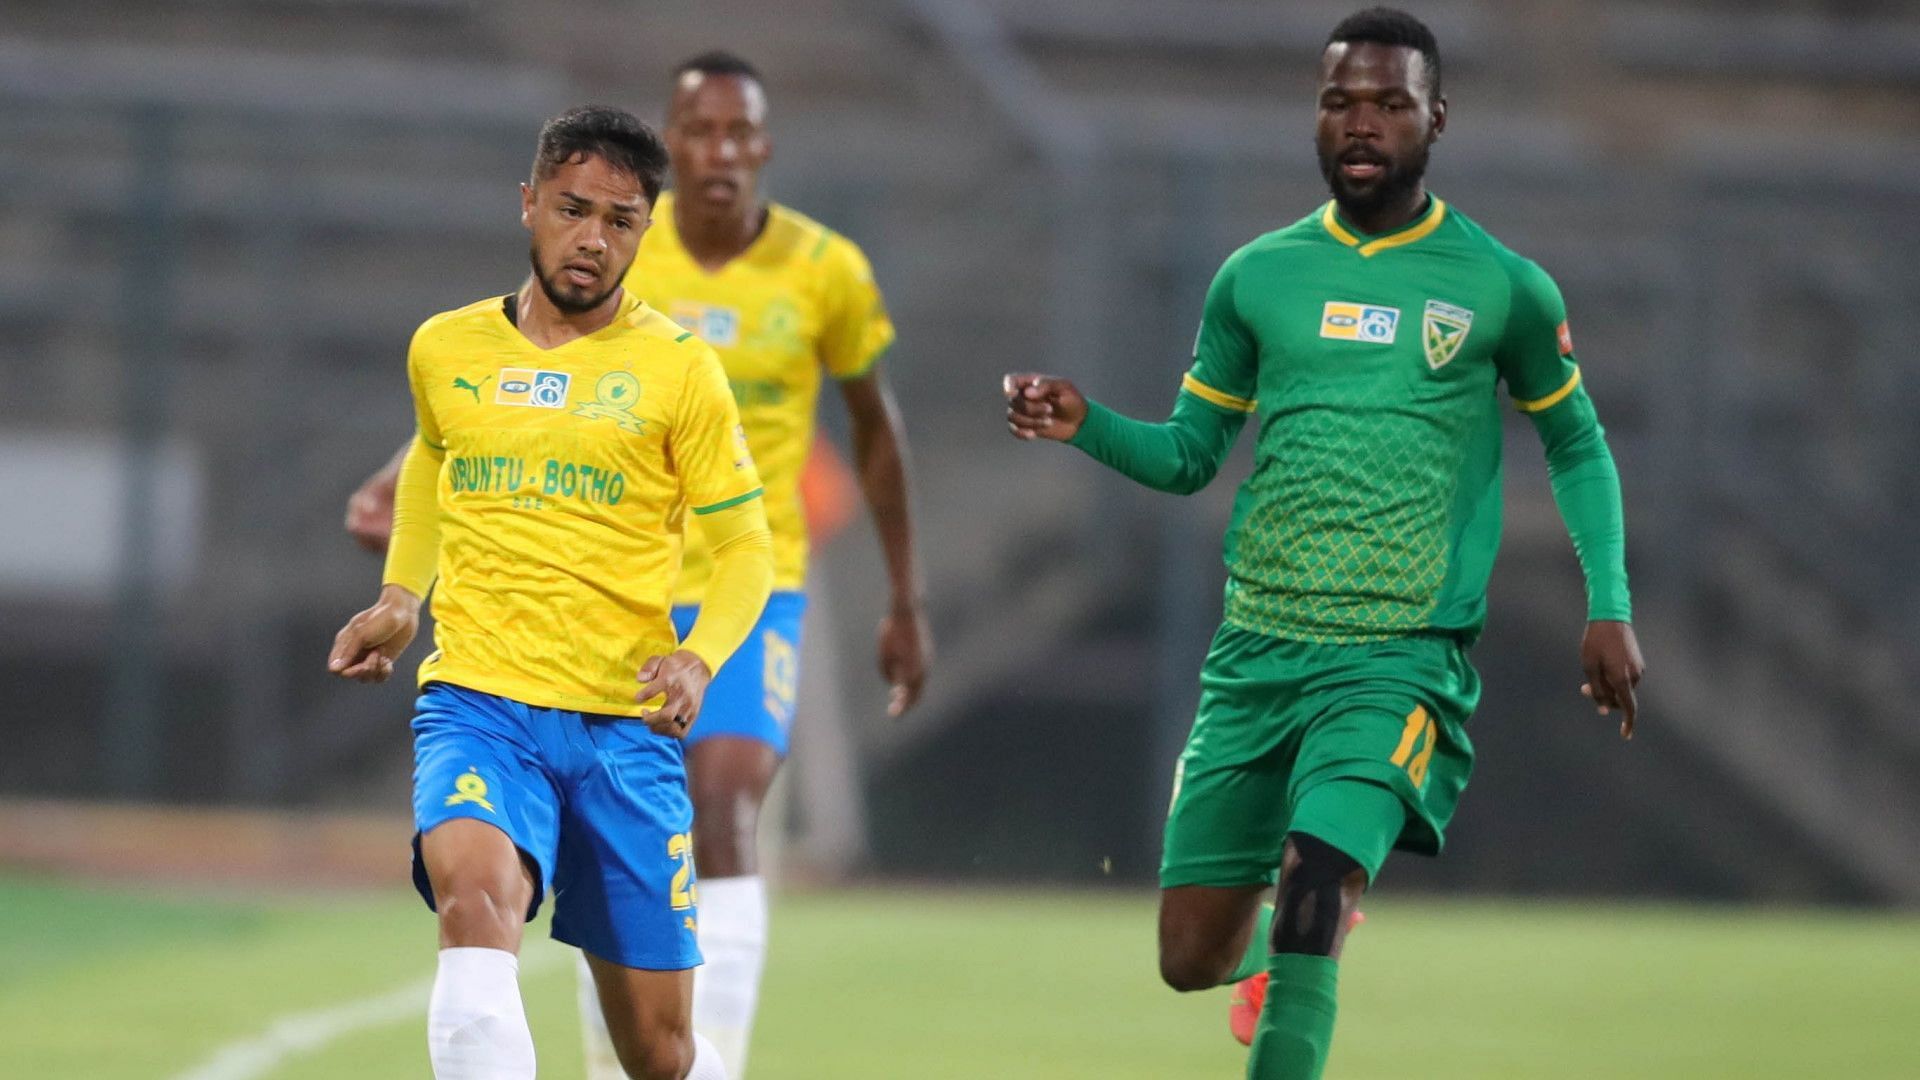 Golden Arrows vs Mamelodi Sundowns prediction, preview, workforce information and extra | South African Premier Soccer League 2021-22